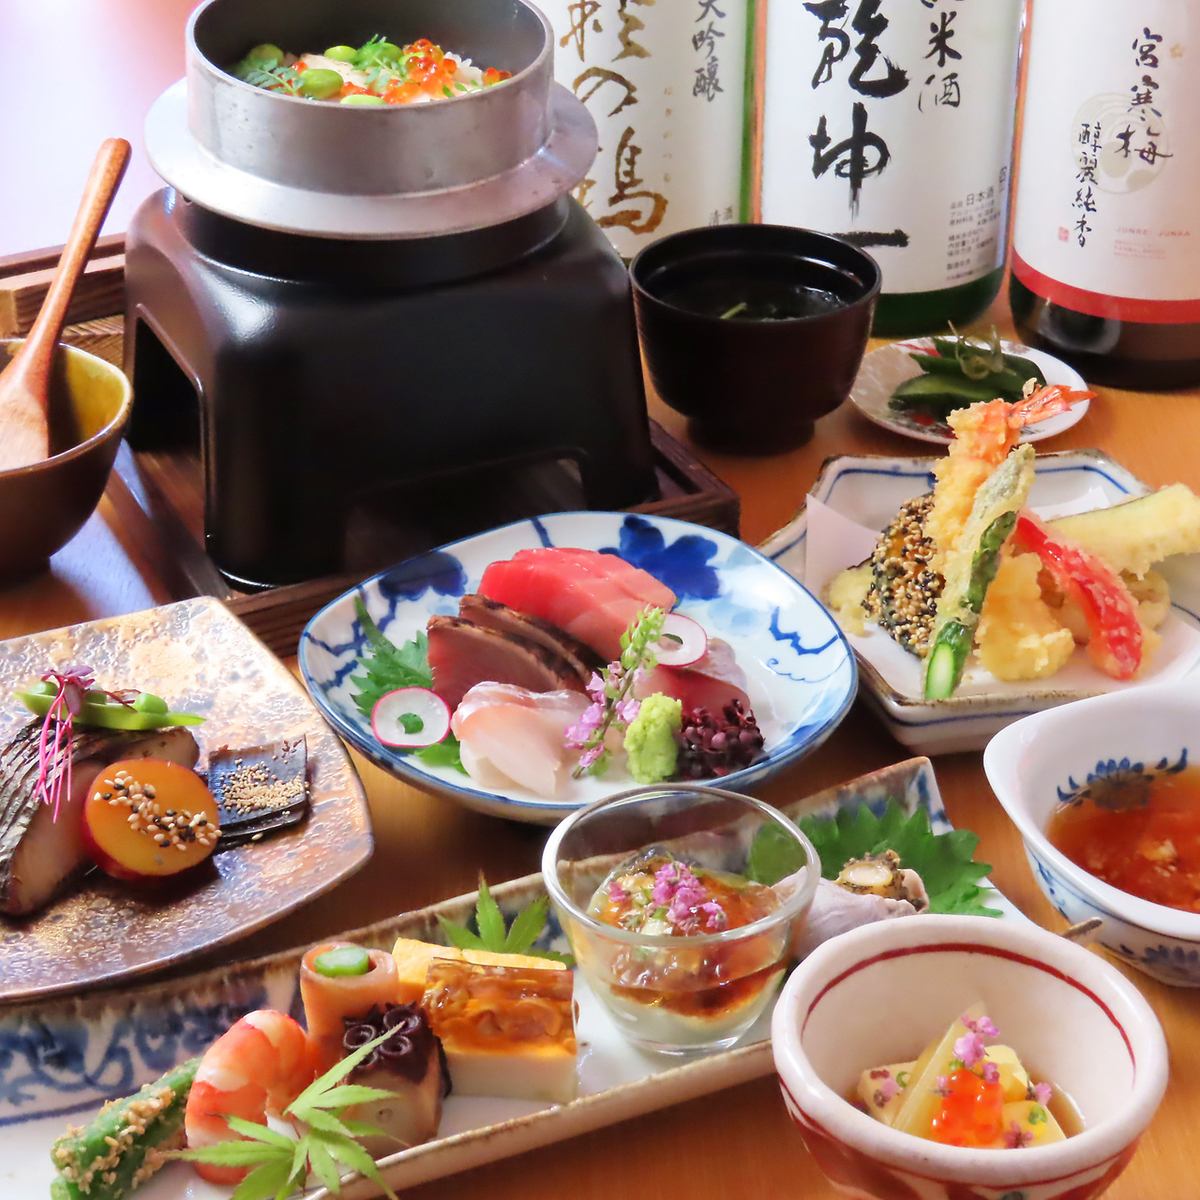 Enjoy Japanese cuisine filled with attention to detail.There is also a course meal recommended for entertainment and dinner parties.